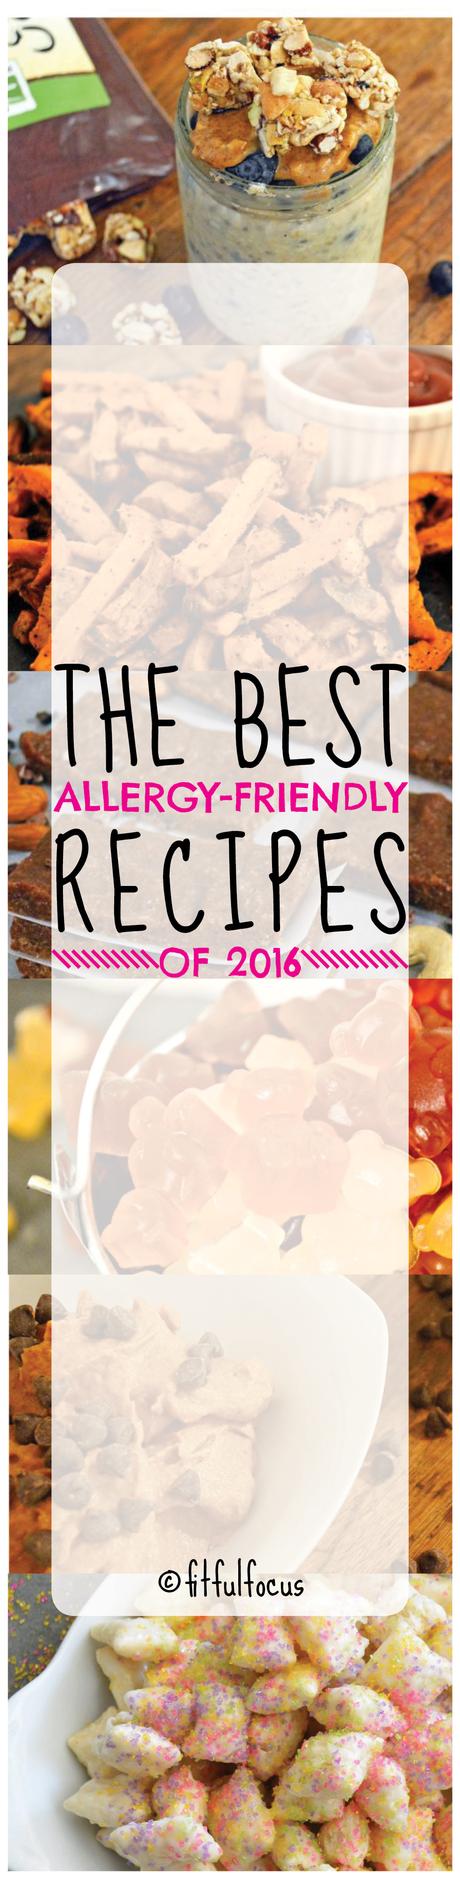 The Best Allergy-Friendly Recipes of 2016